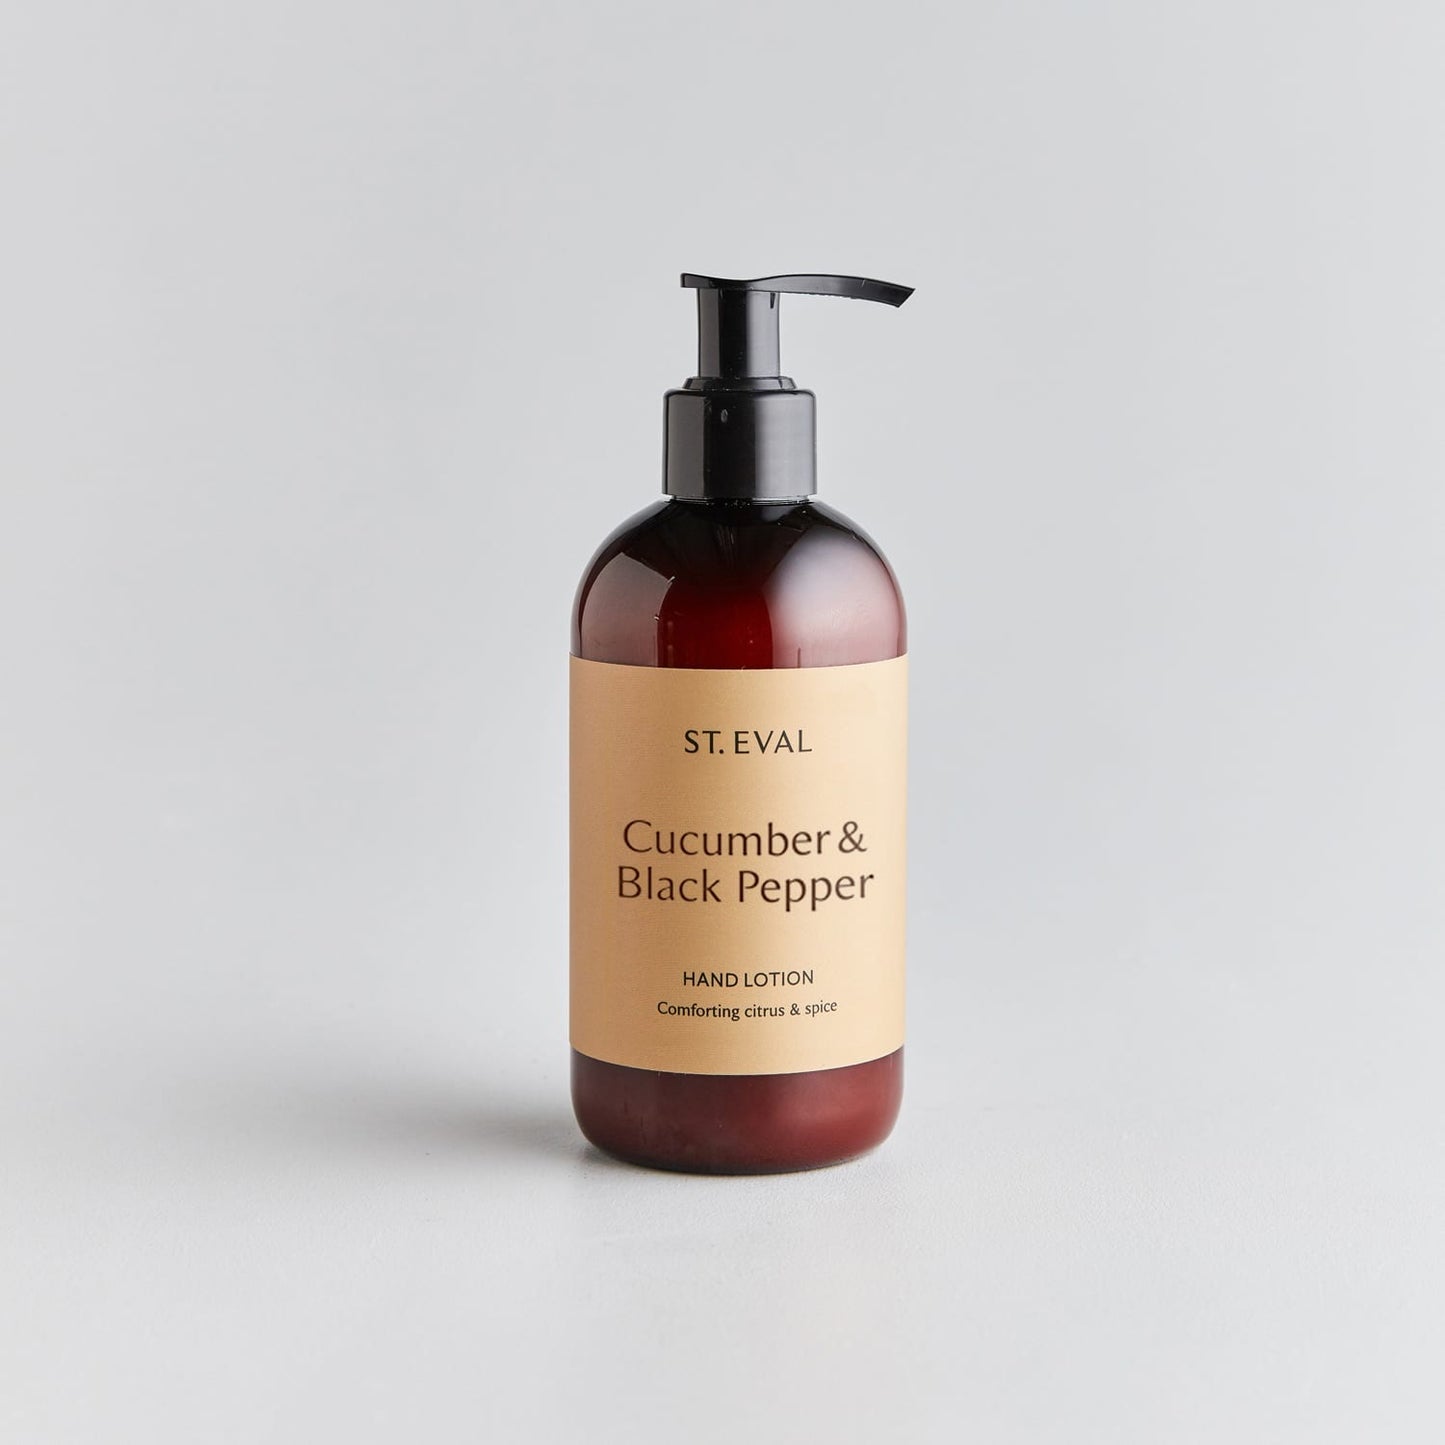 St Eval Hand Lotion & Hand Soap